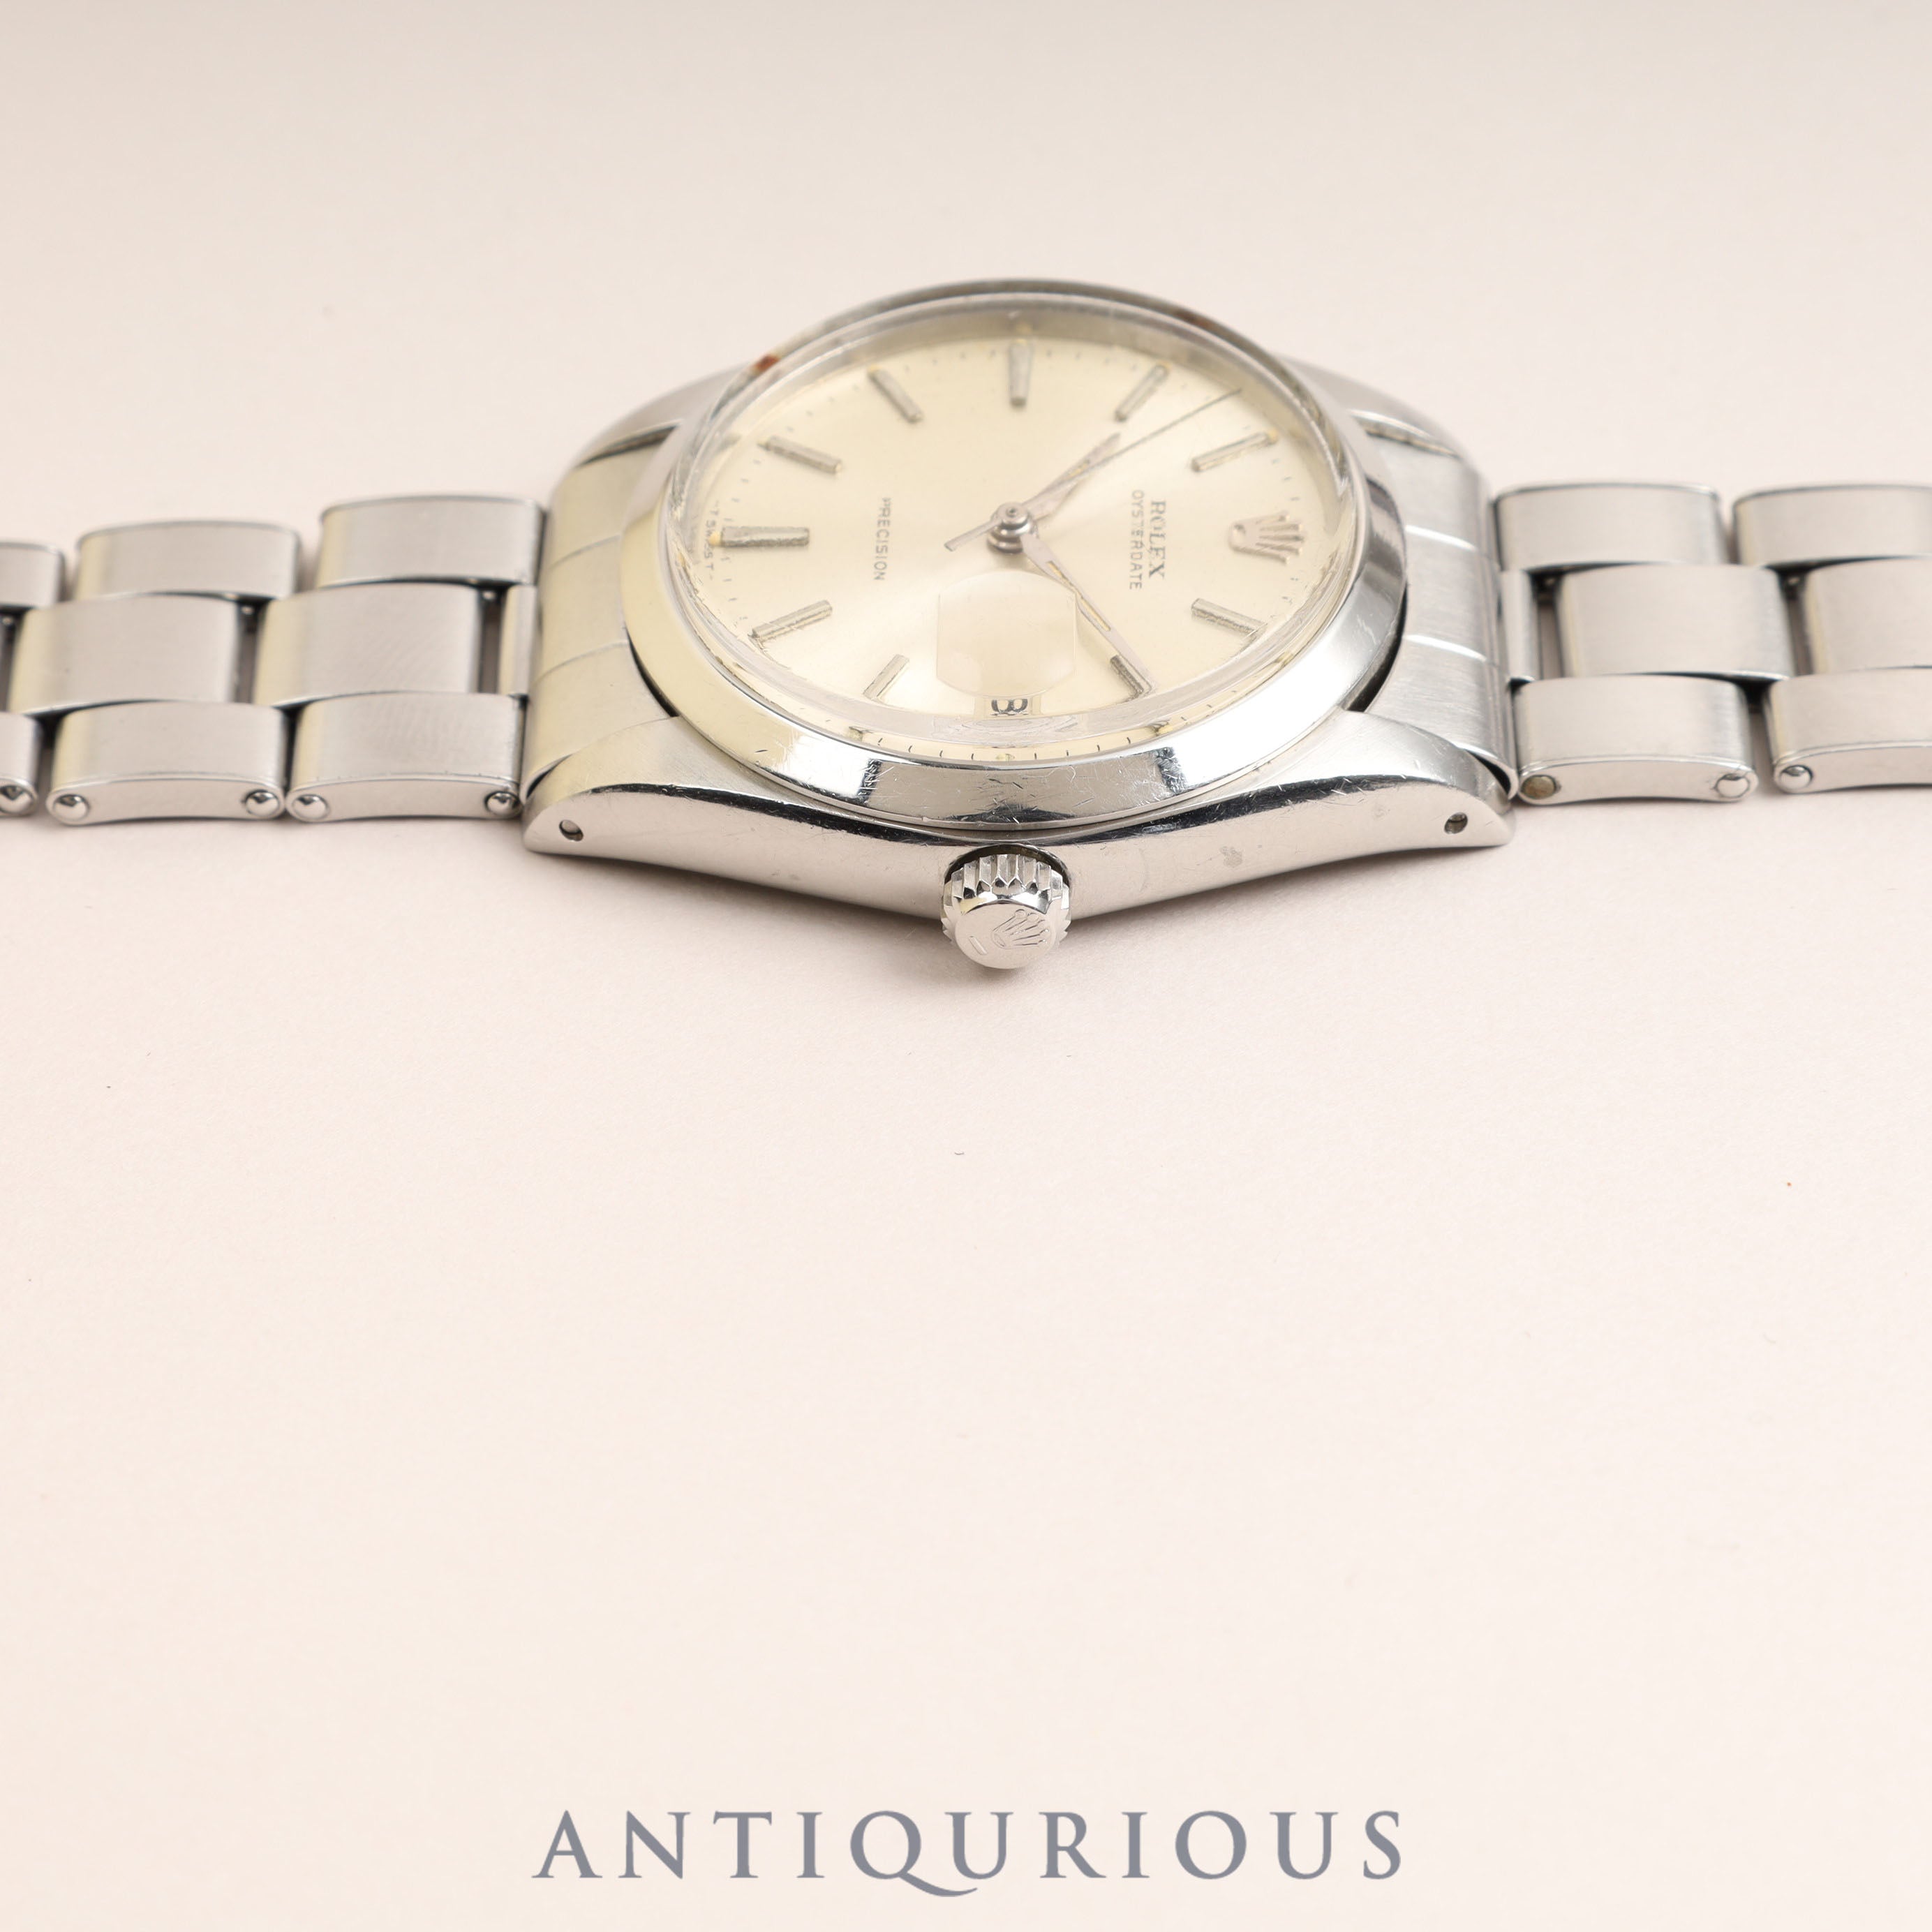 ROLEX OYSTER DATE PRECISION 6694 with warranty